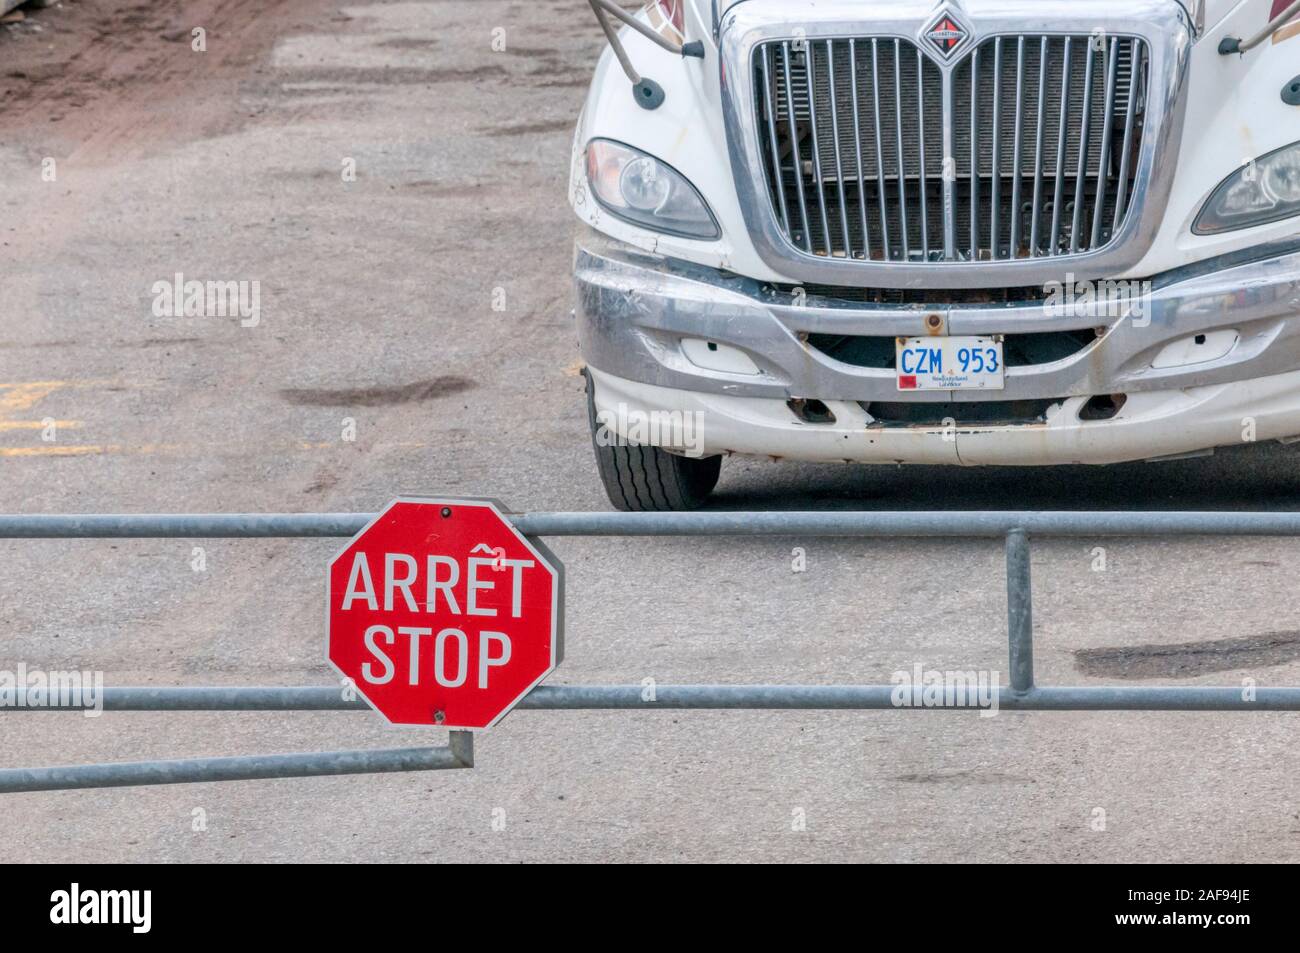 Truck stopped behind bilingual Arret / Stop sign in Blanc-Sablon in Quebec, Canada. Stock Photo